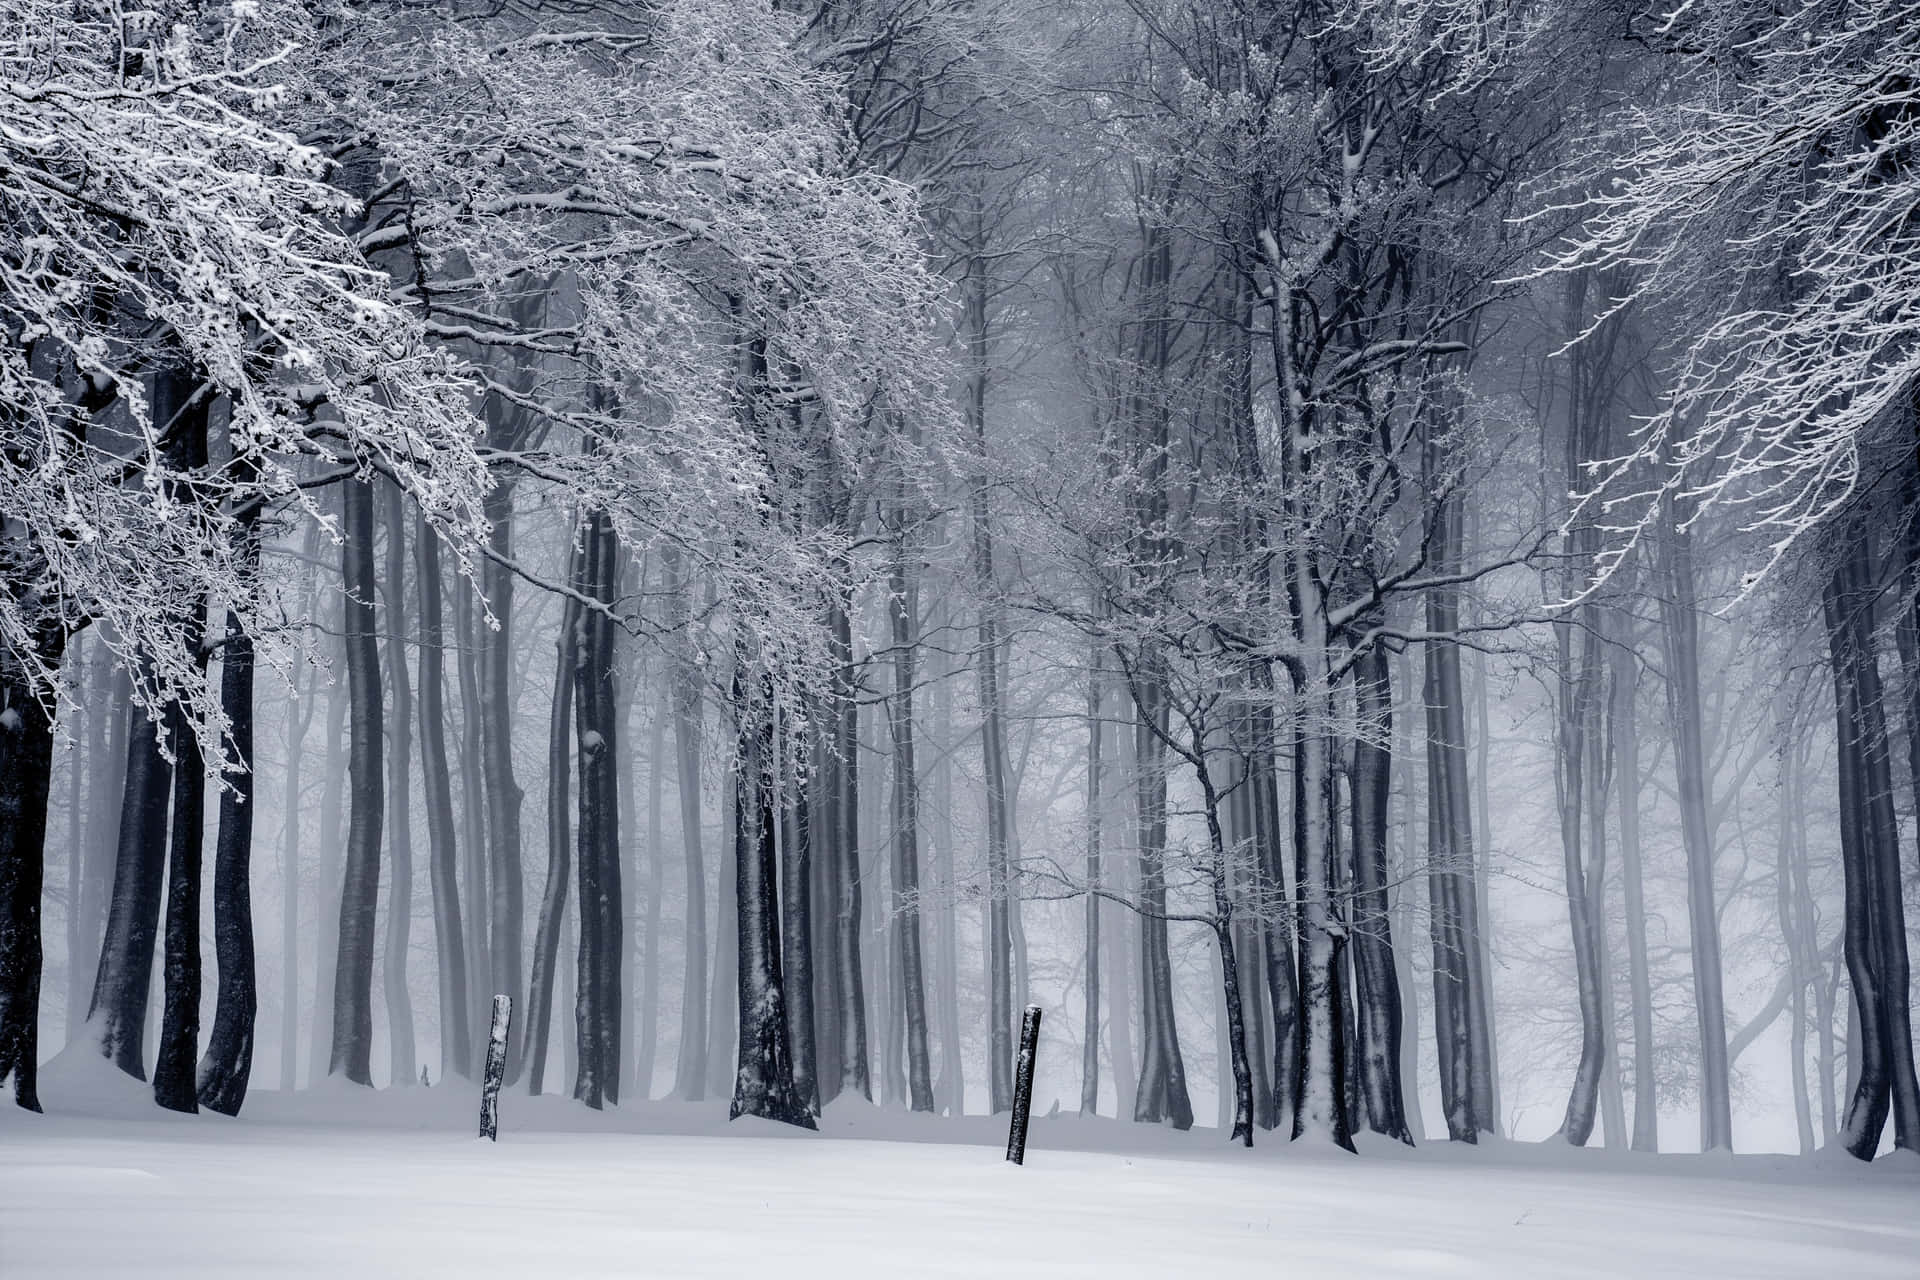 a snowy forest with trees covered in snow